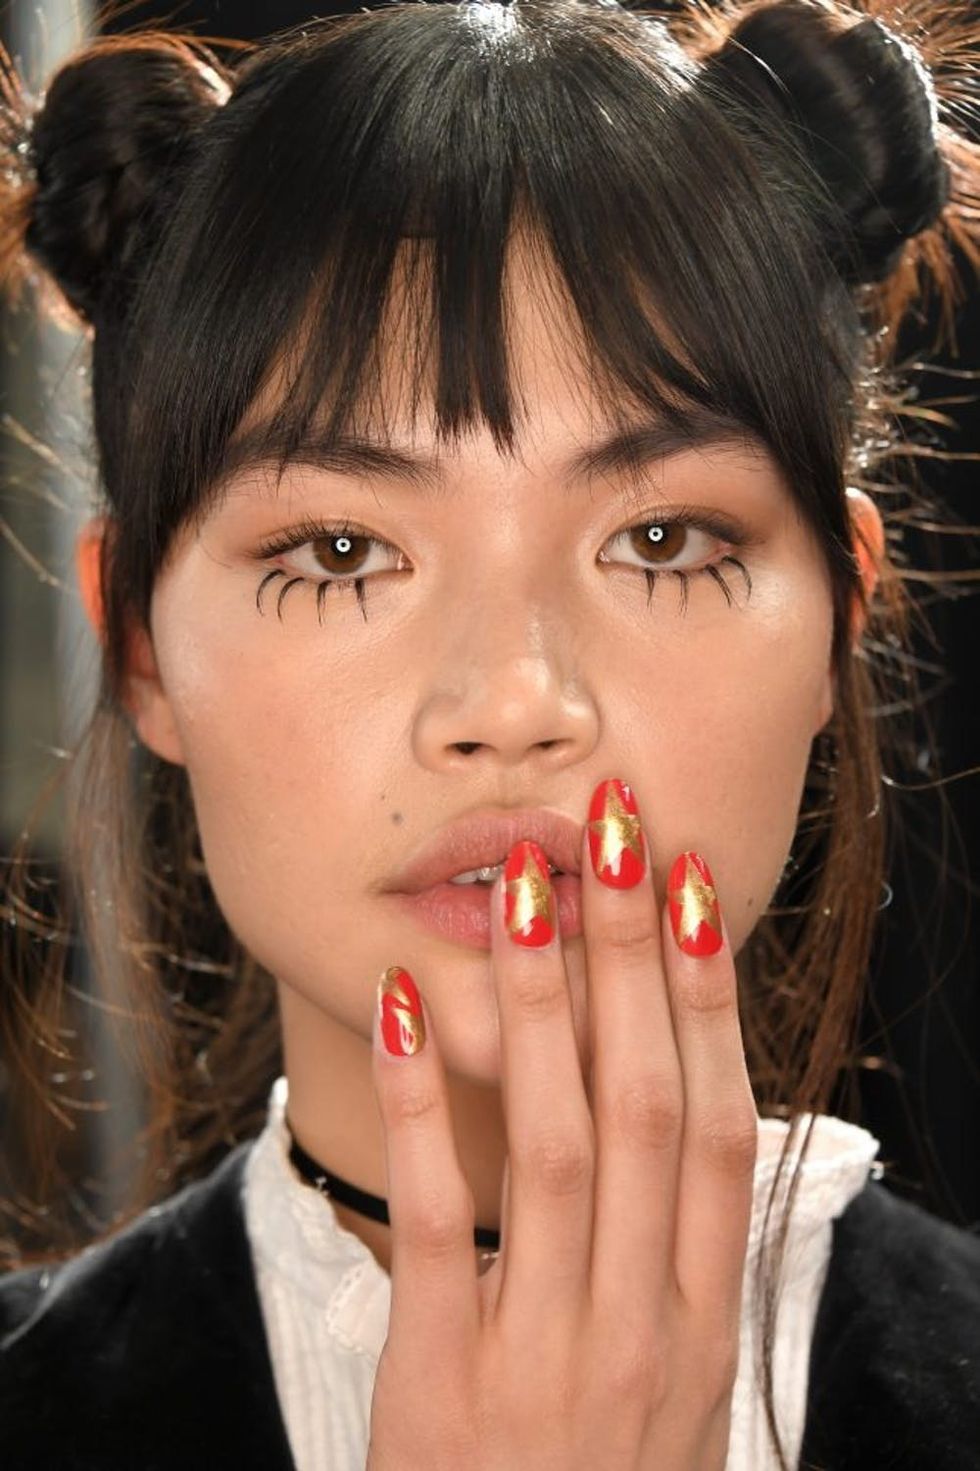 NEW YORK, NY - FEBRUARY 10: A model poses backstage with nails by CND for Jeremy Scott Fall/Winter 2017 on February 10, 2017 in New York City. (Photo by Jennifer Graylock/Getty Images for CND)